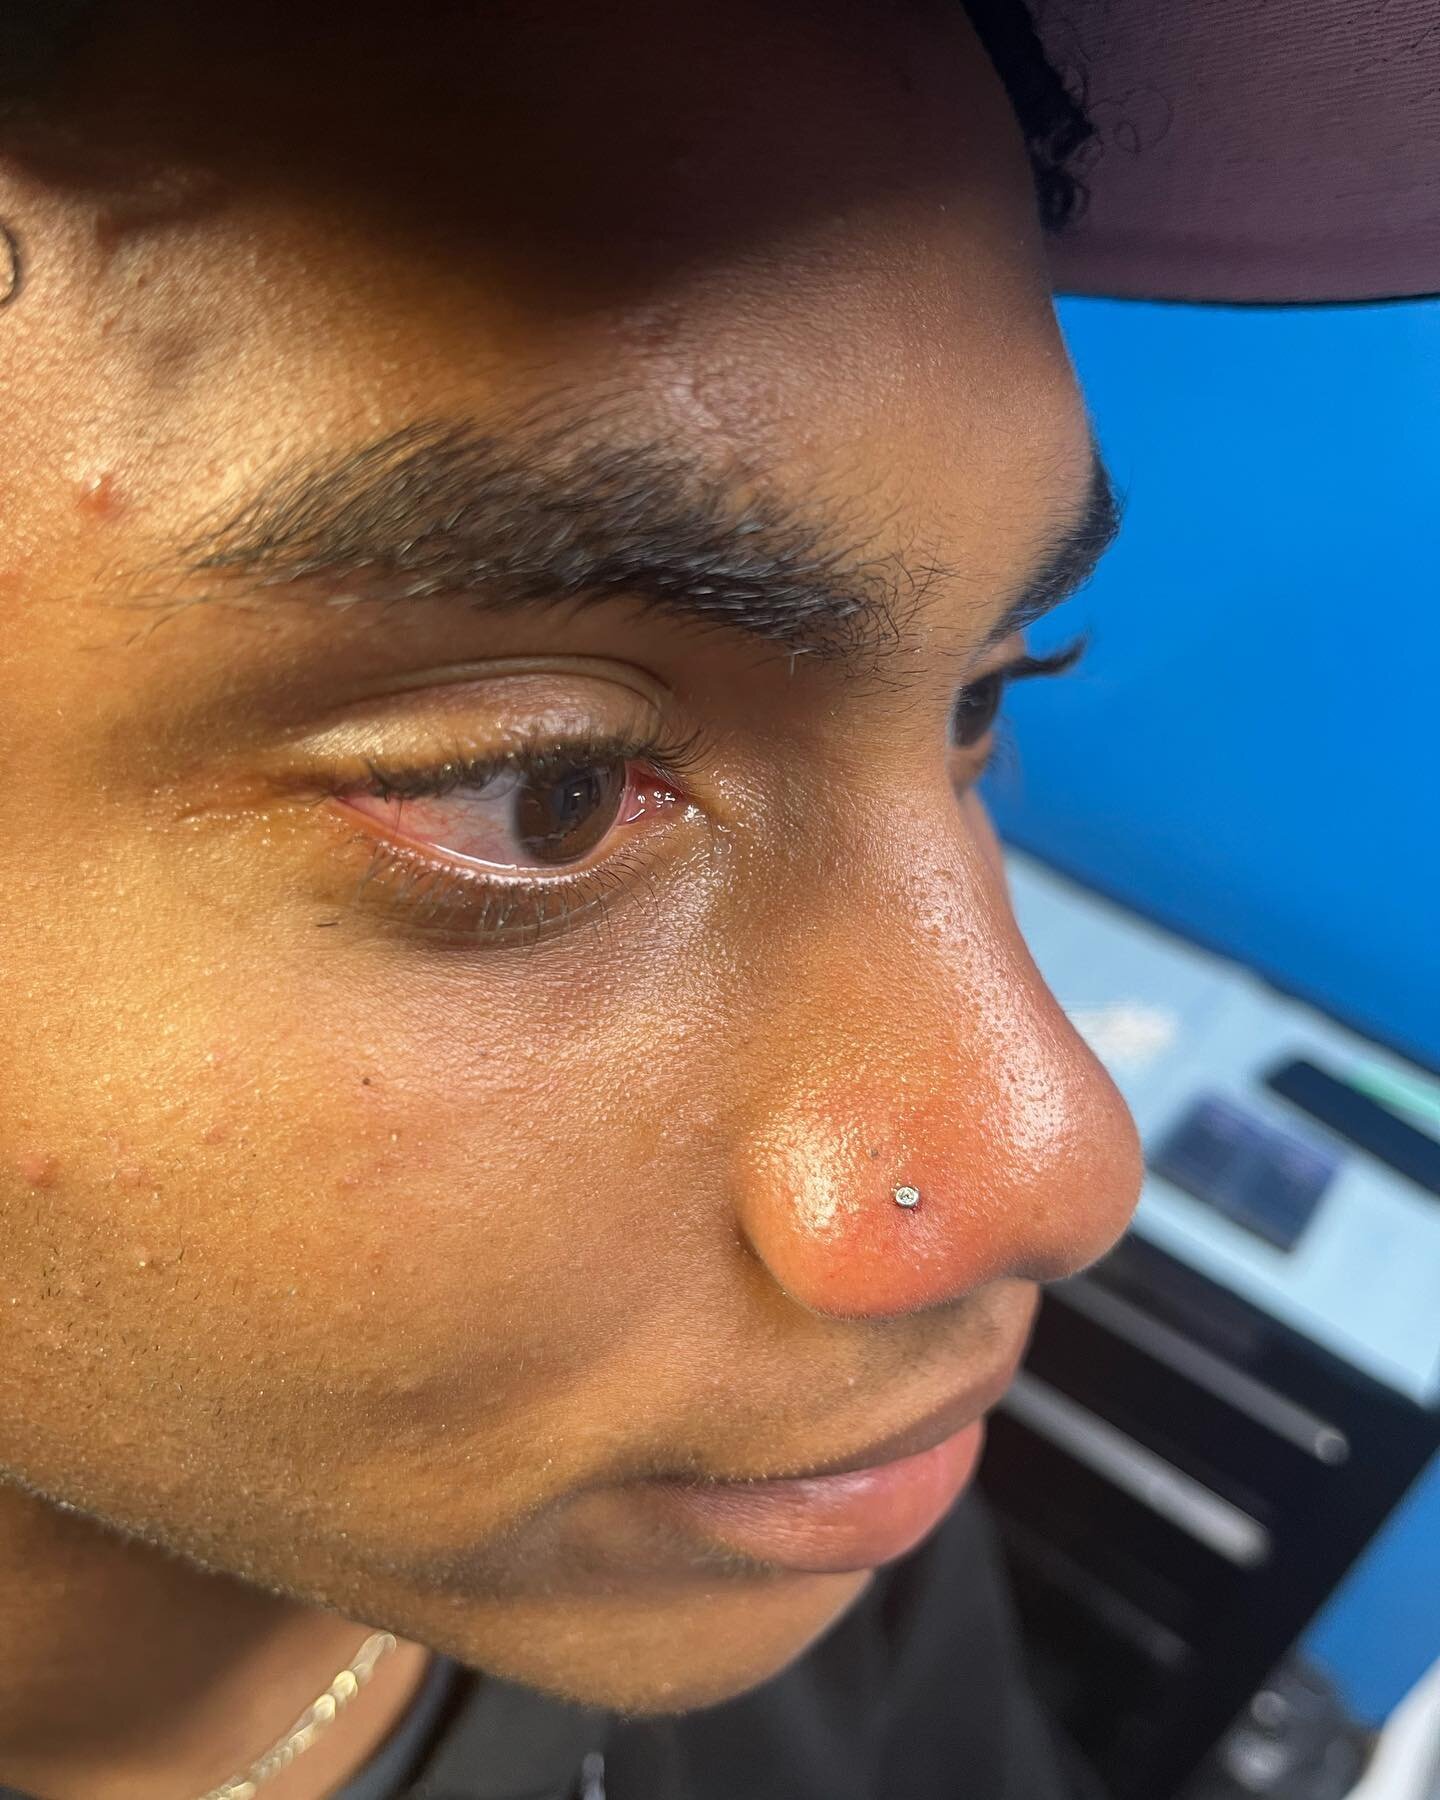 Nostril piercing 👃🏼👀 come by and decorate your face! #piercingsfordays #nostrilpiercing #pierclings